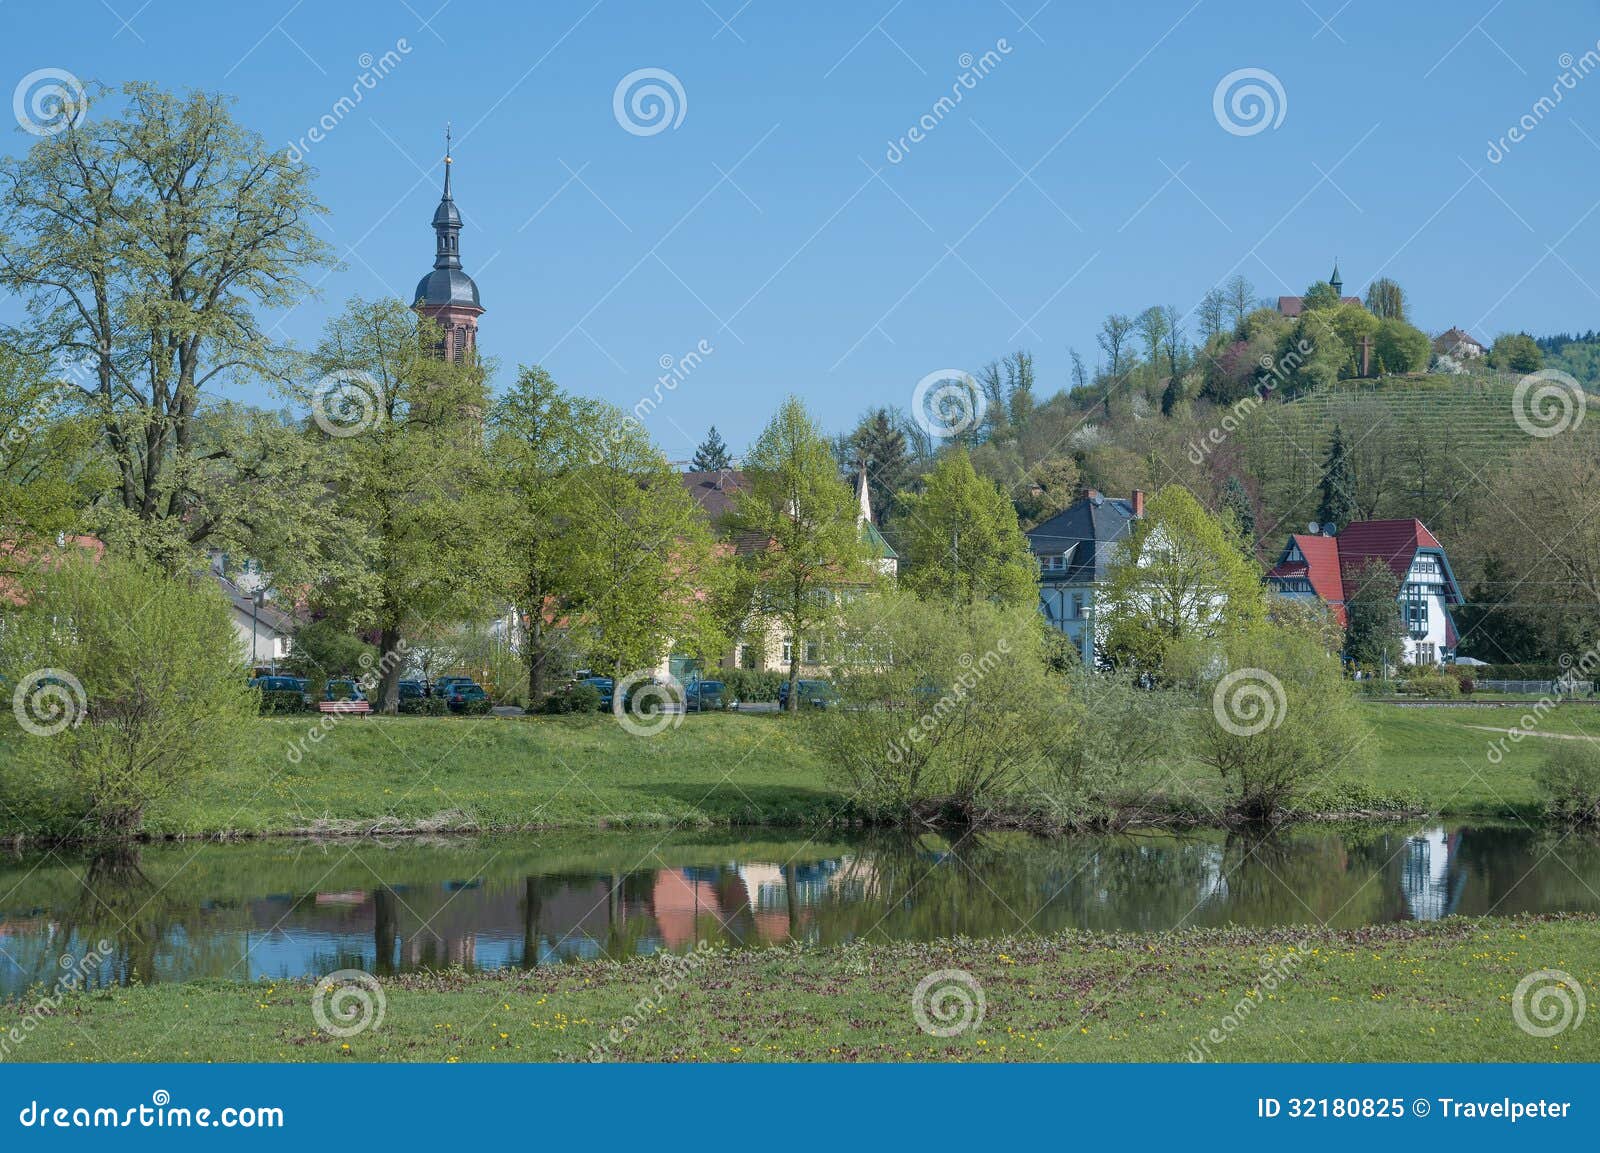 gengenbach,black forest,germany